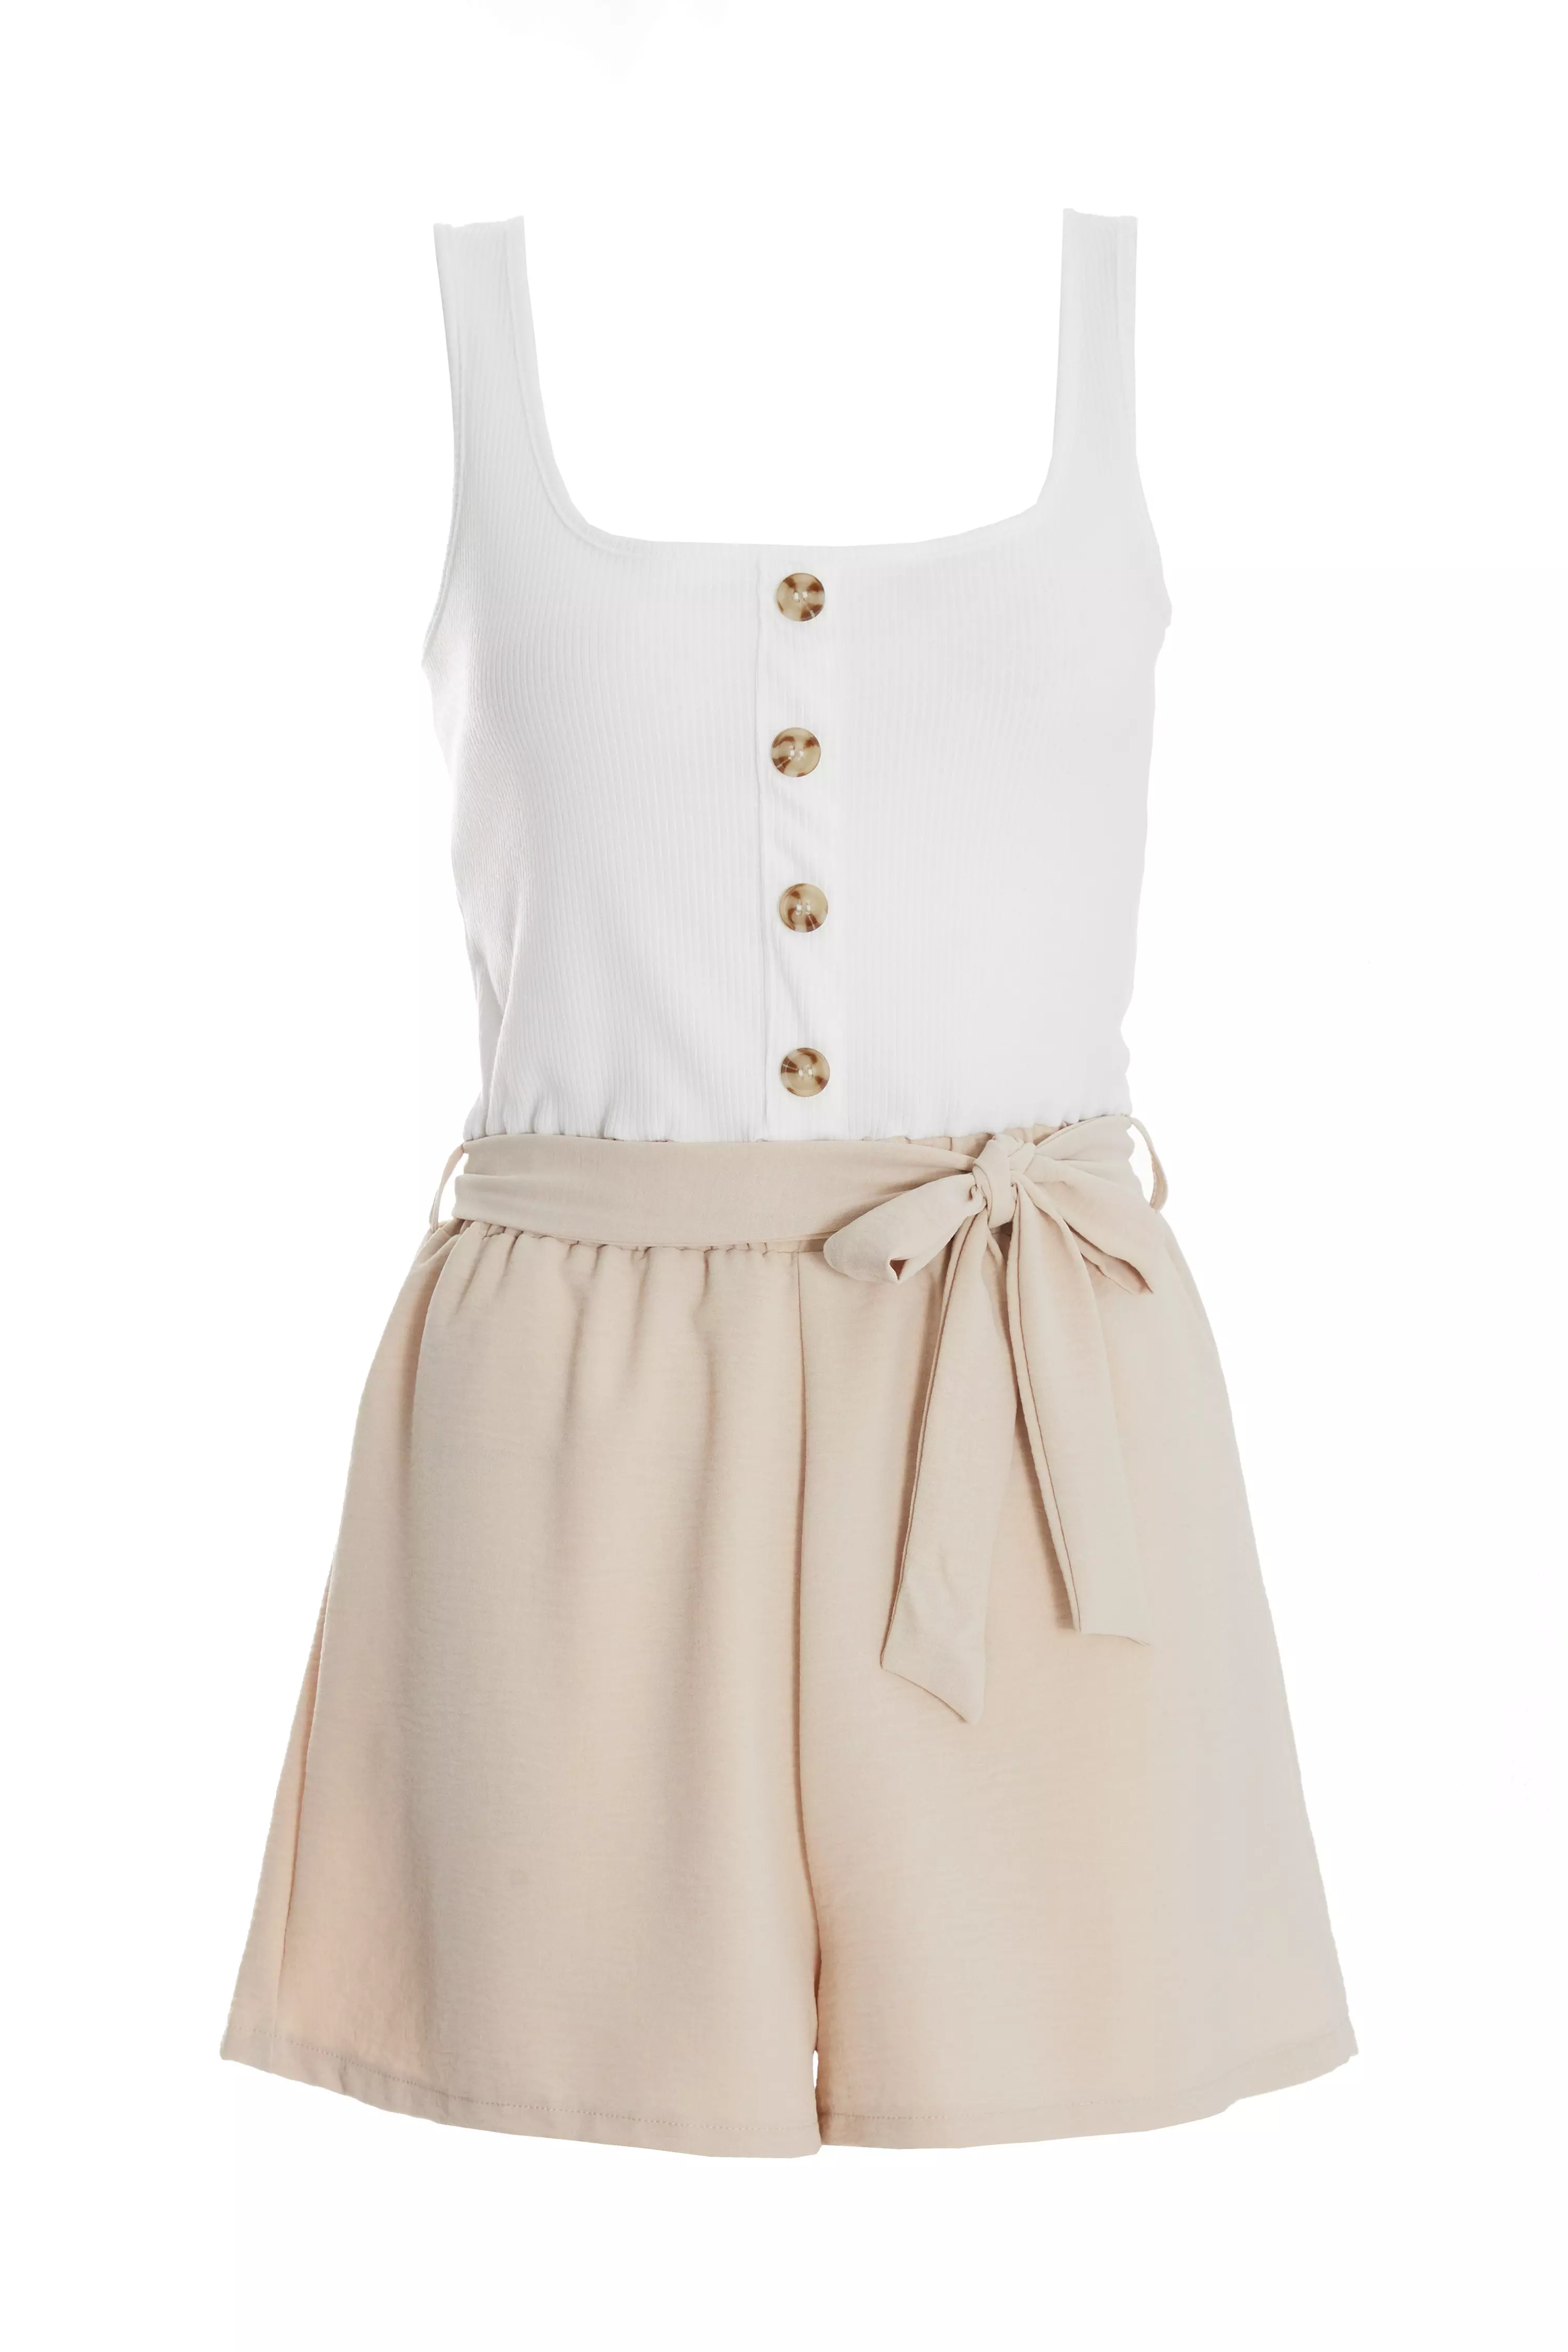 Cream Button Front Playsuit